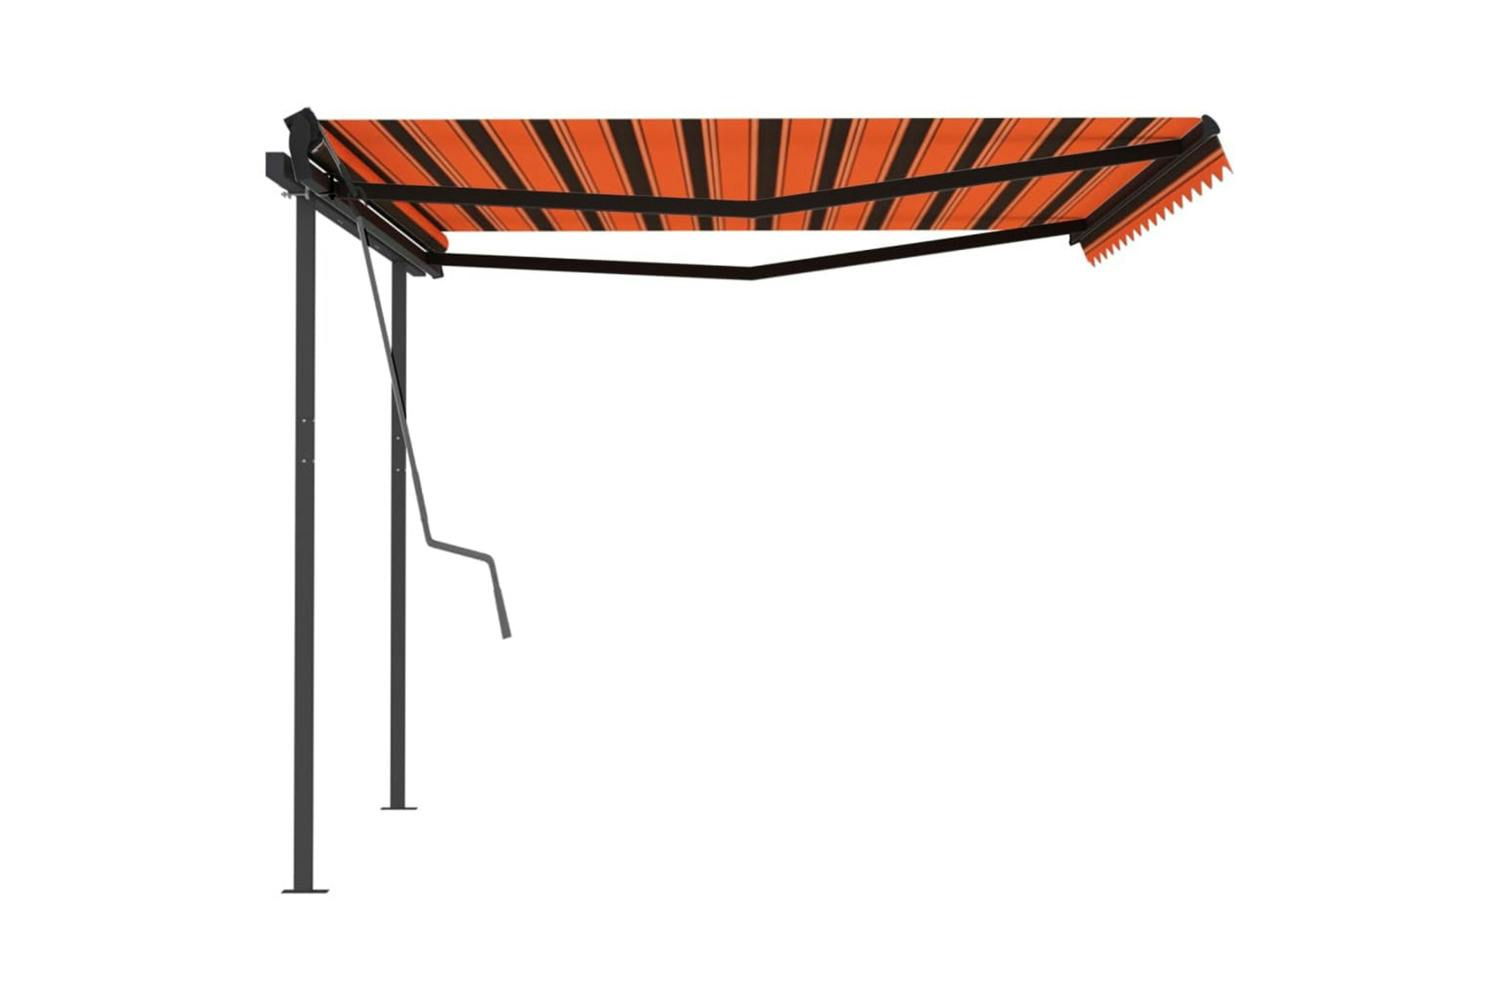 Vidaxl 3070220 Manual Retractable Awning With Posts 4x3.5 M Orange And Brown